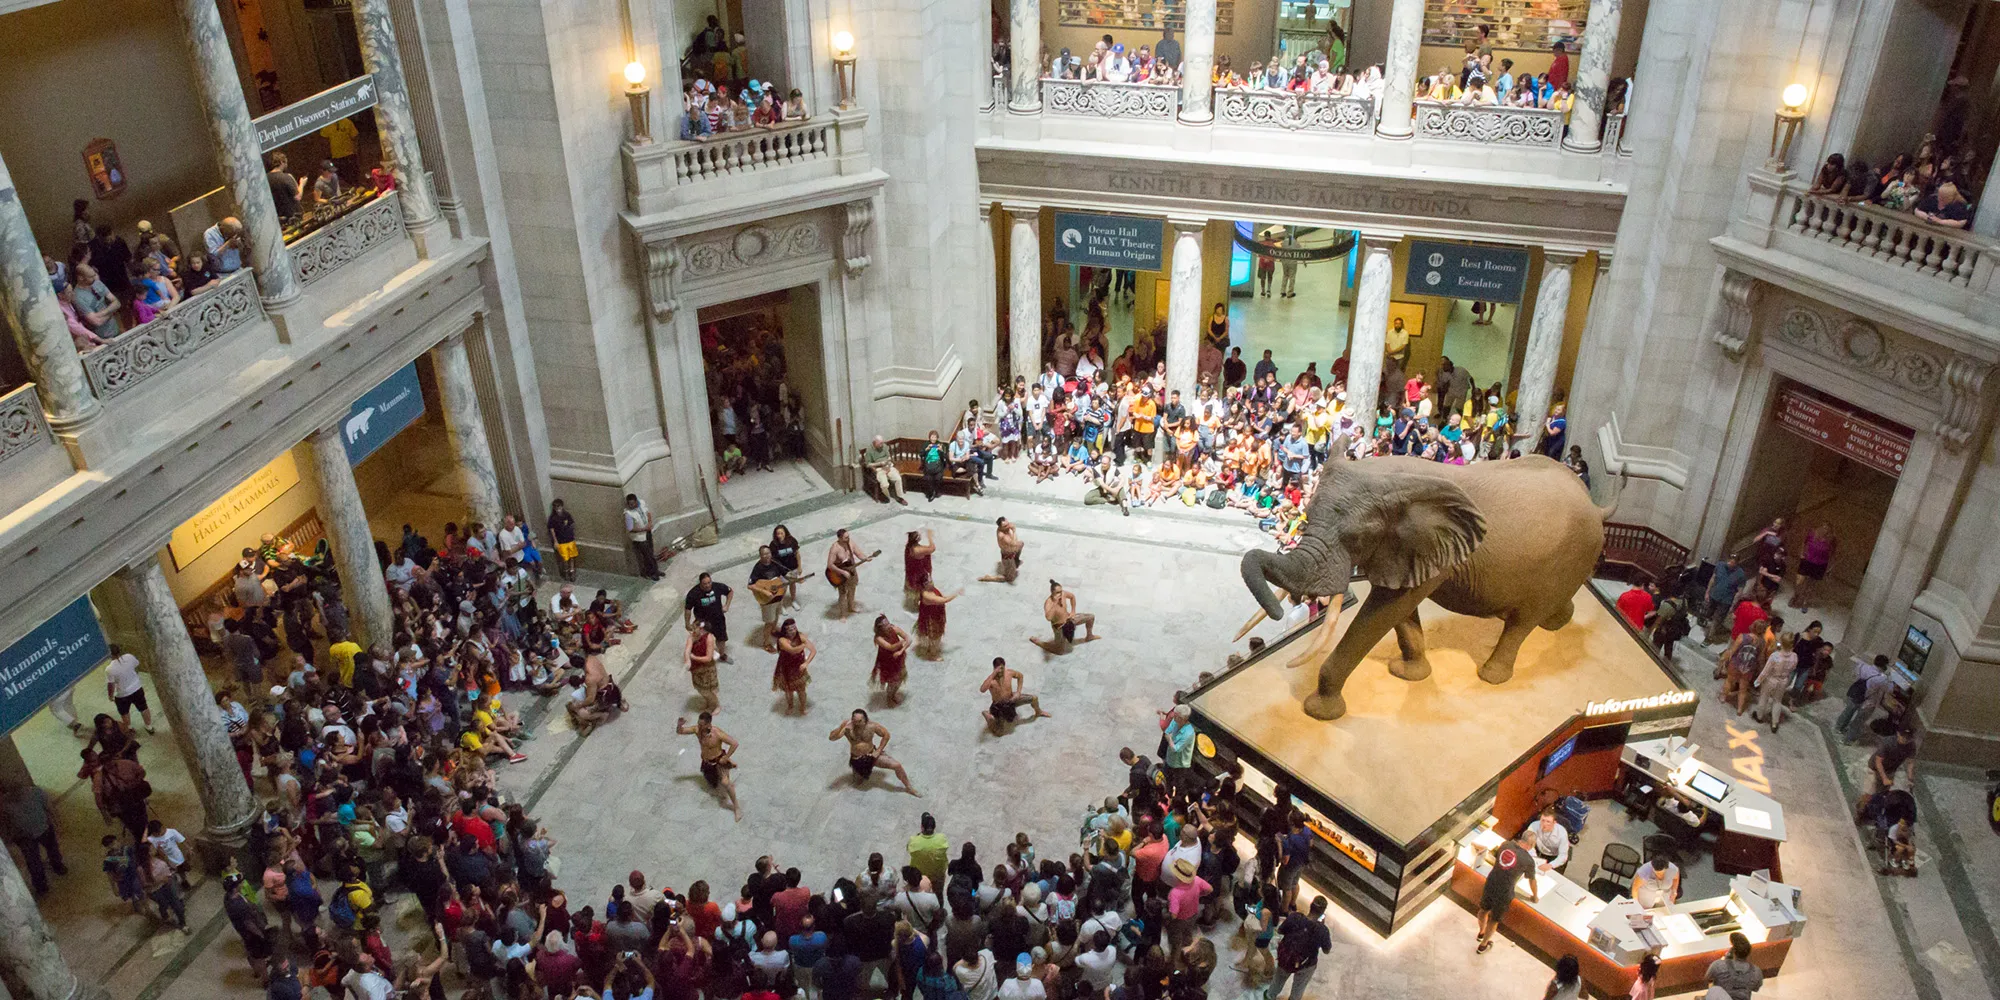 View looking down at the Rotunda floor, where a crowd has gathered around 15 Māori dancers performing next to the elephant.